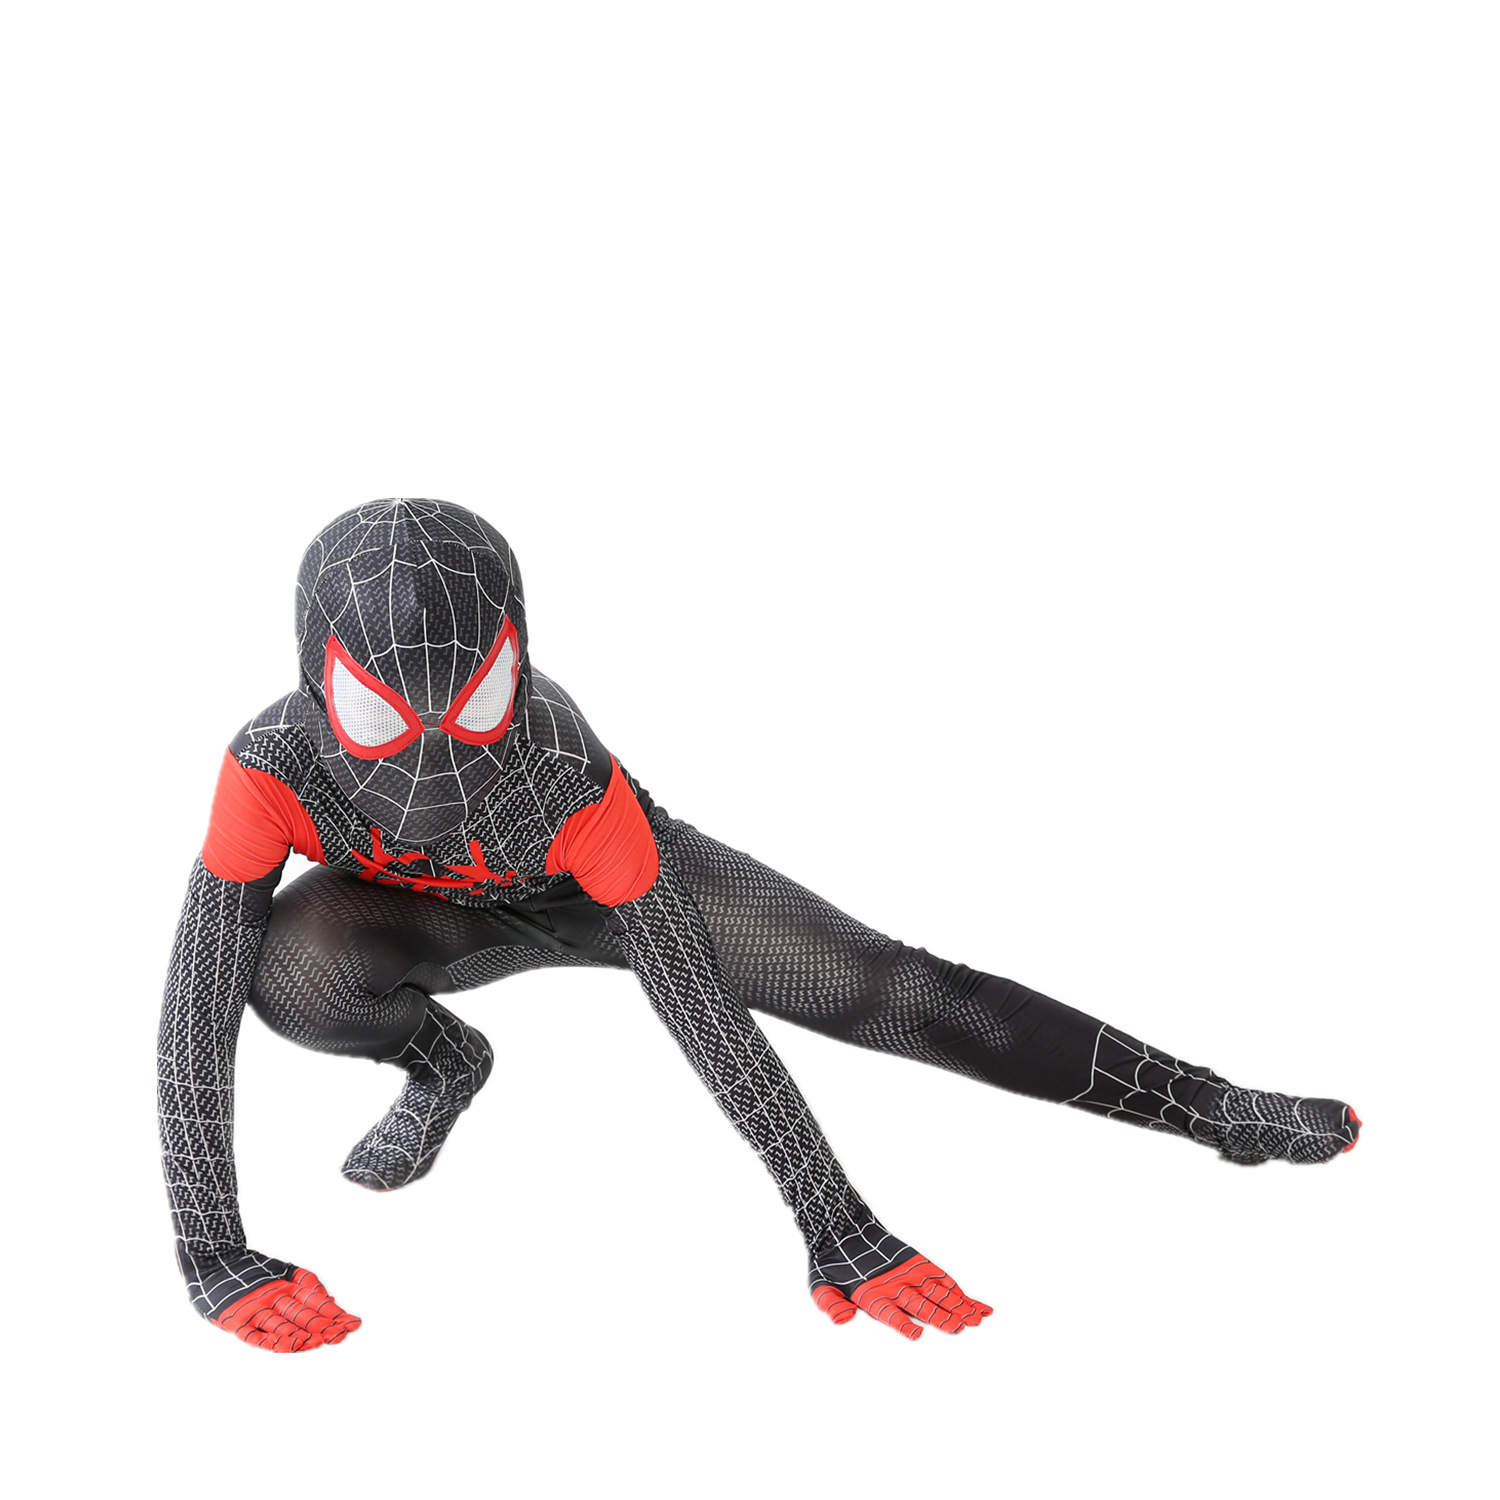 Miles Morales Costume, Miles Morales Costume Online Store, Free Global  Shipping Over 49$